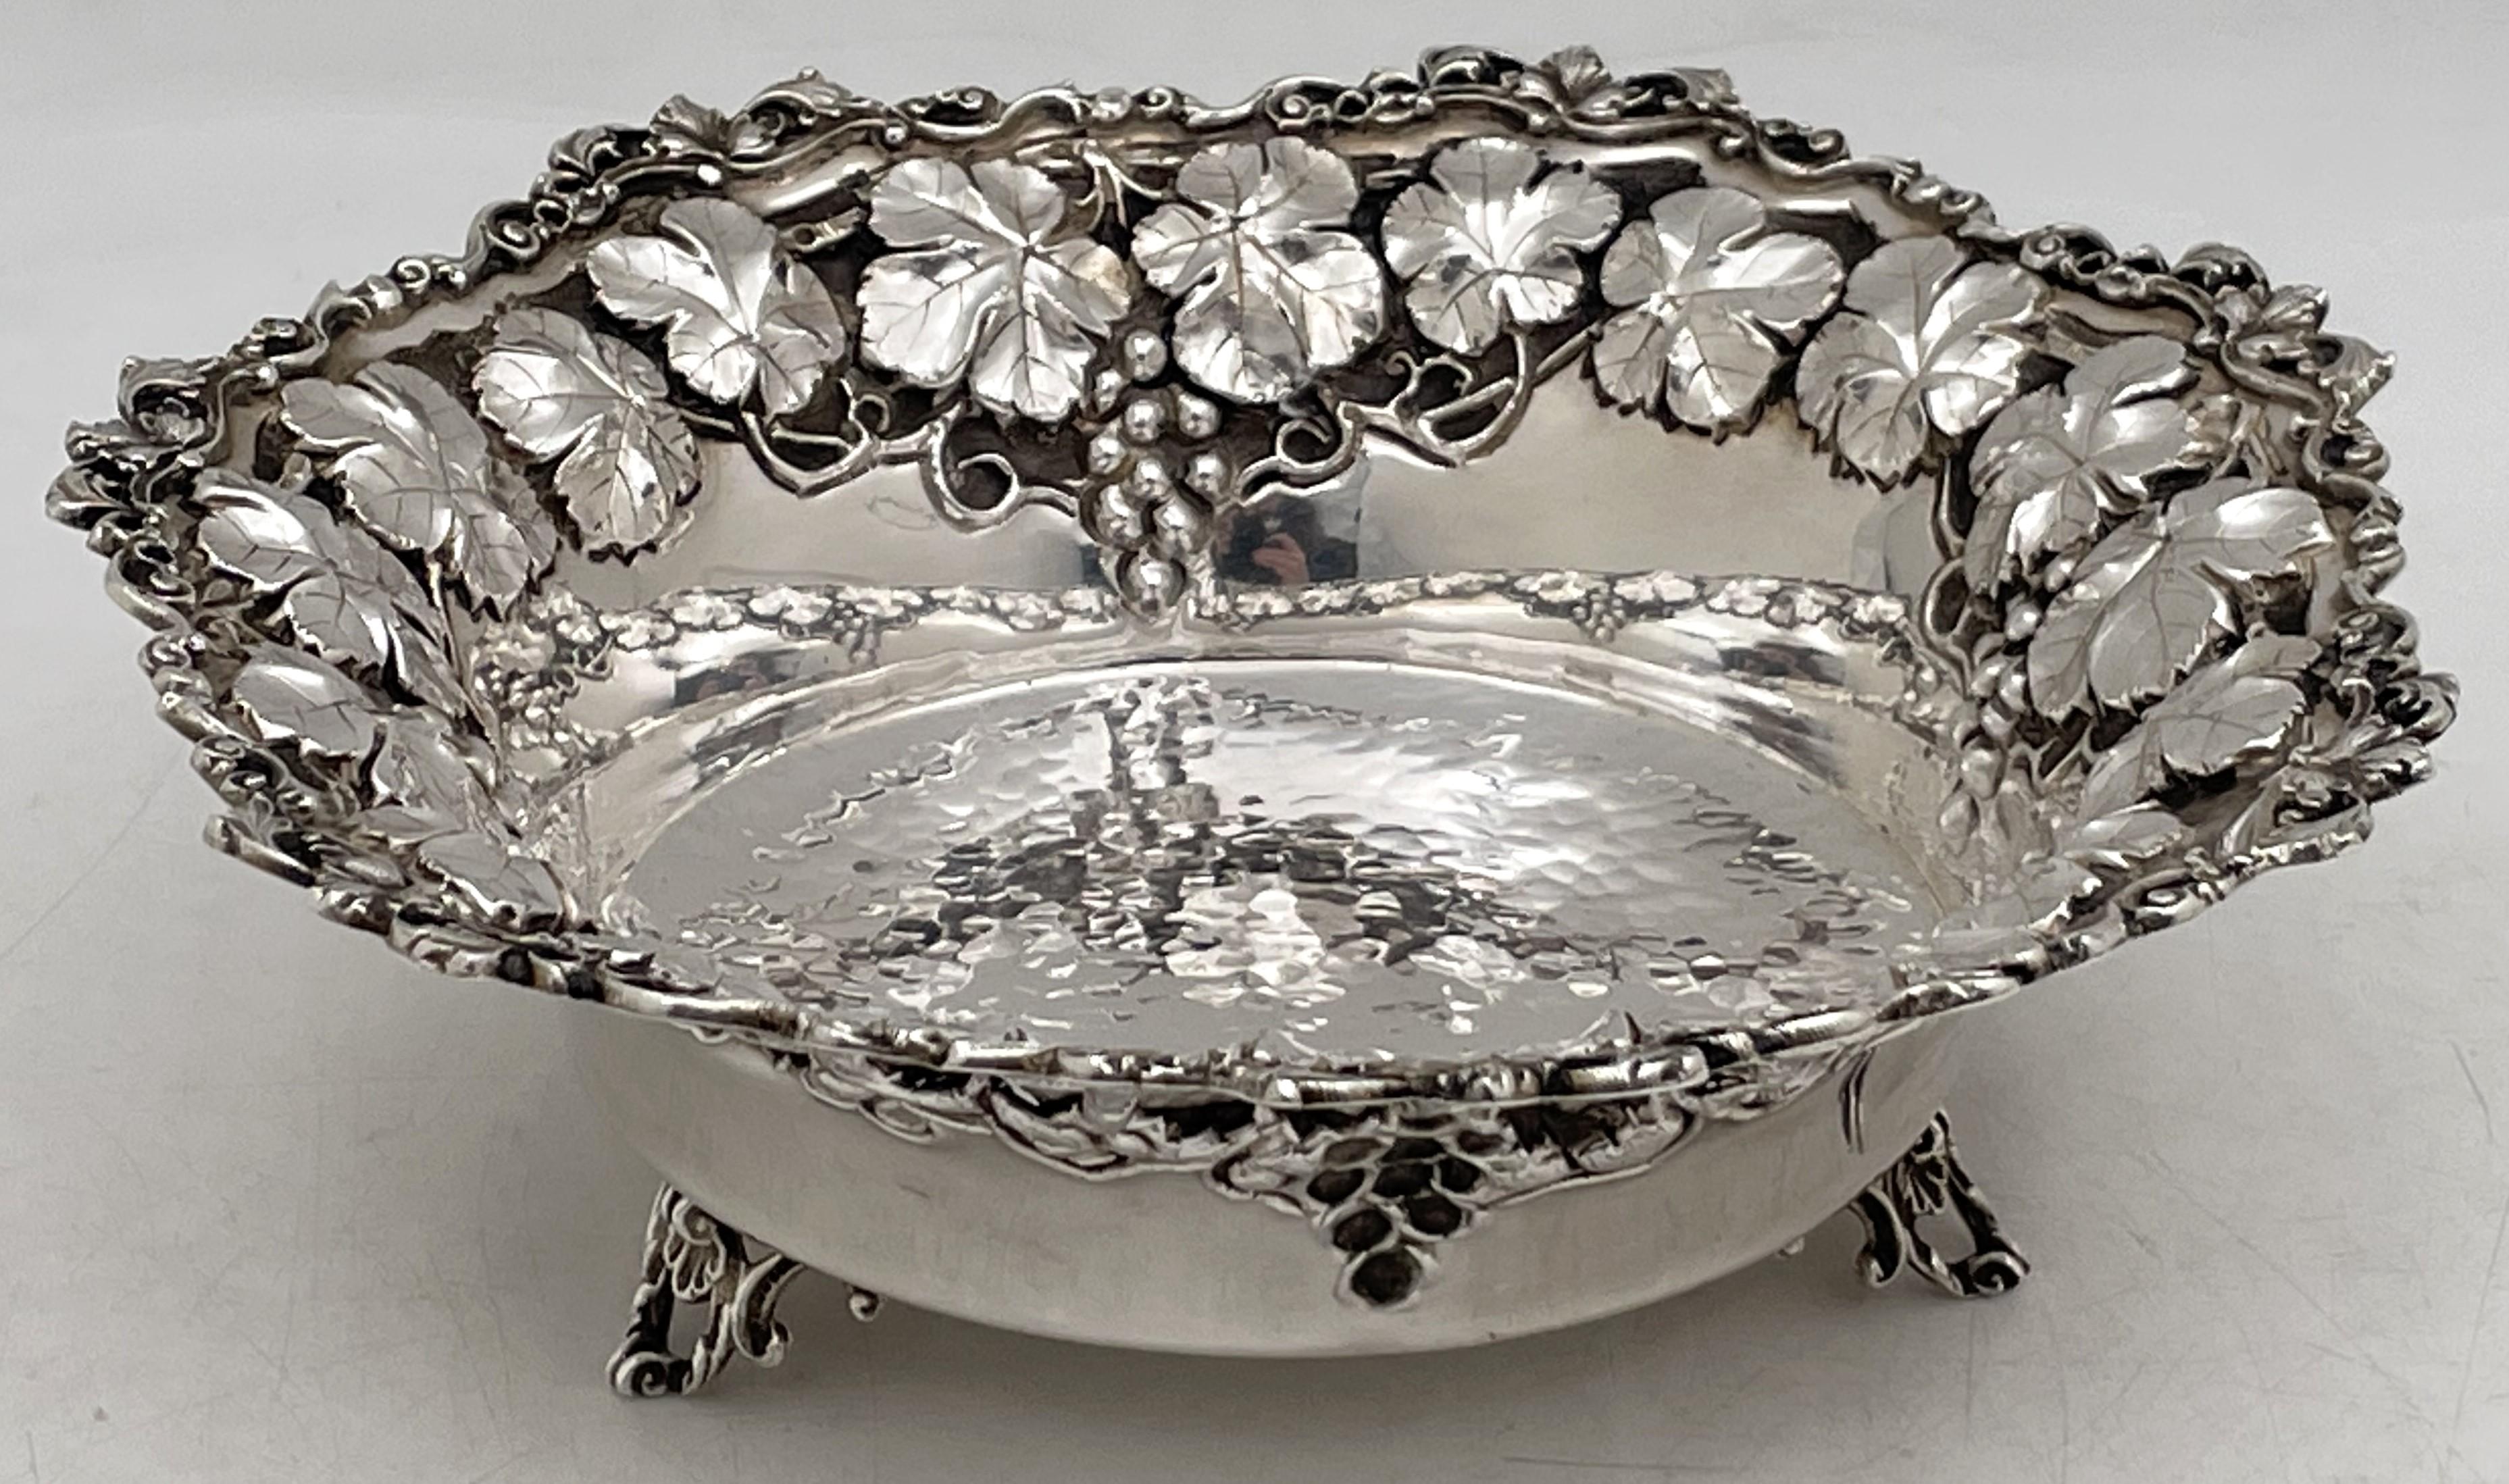 Sterling silver, hammered 20th century bowl with repousse leaves and vine motifs, standing on 3 feet. It measures 8 1/3'' in diameter by 2 1/2'' in height, weighs 9.8 troy ounces, and bears hallmarks as shown. 

Please feel free to ask us any